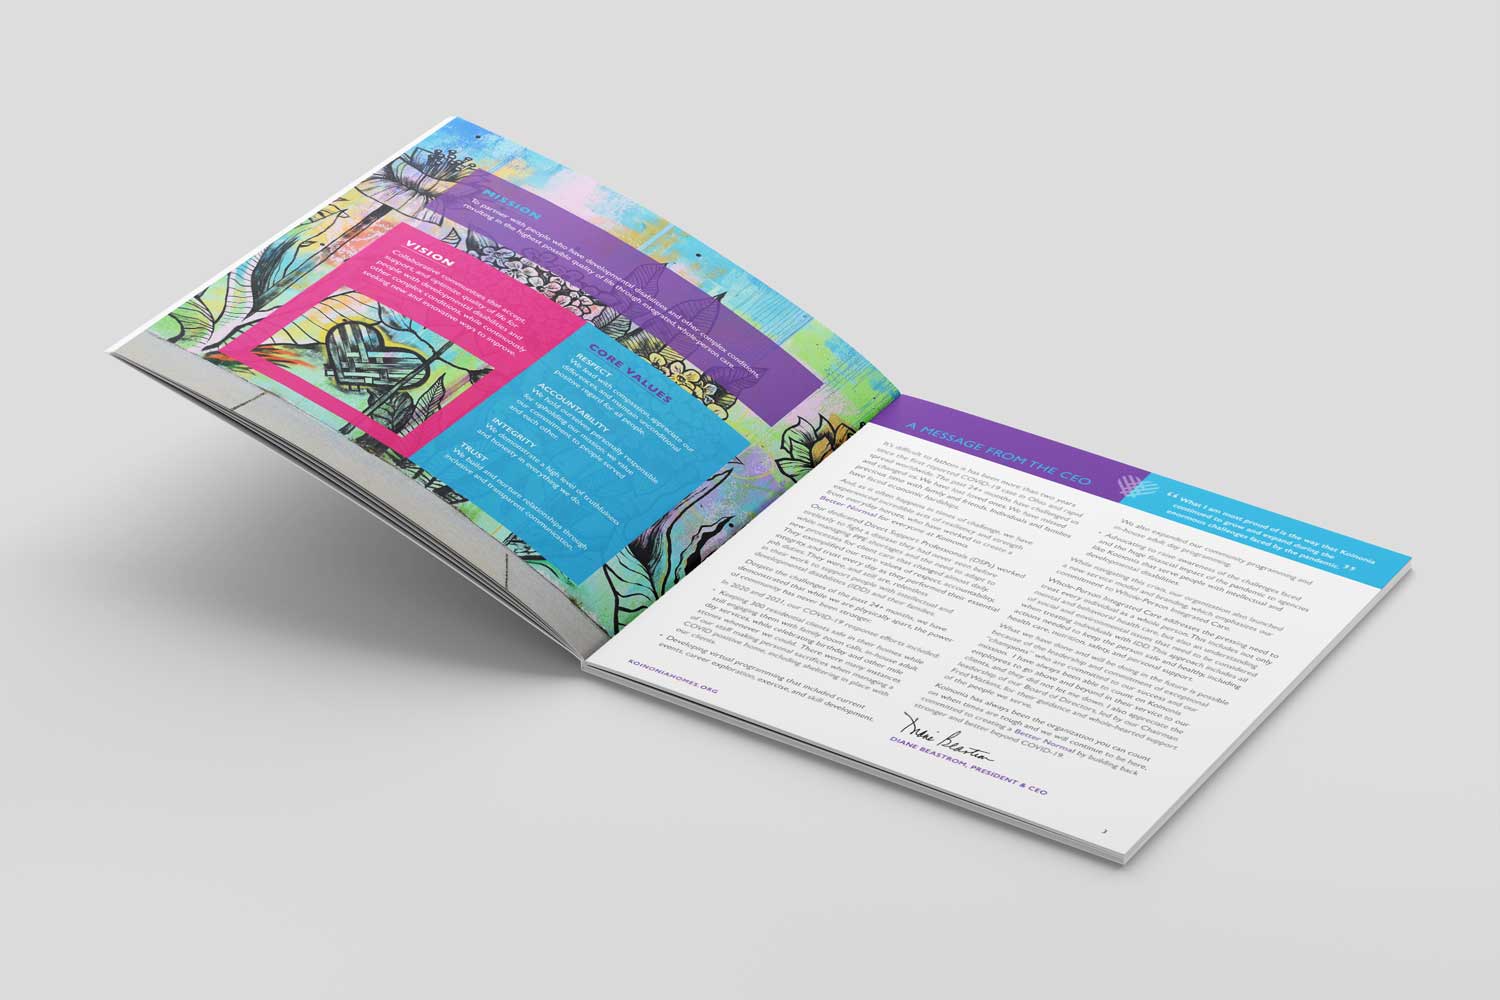 Brochures created for Koinonia to disseminate information about their programs.